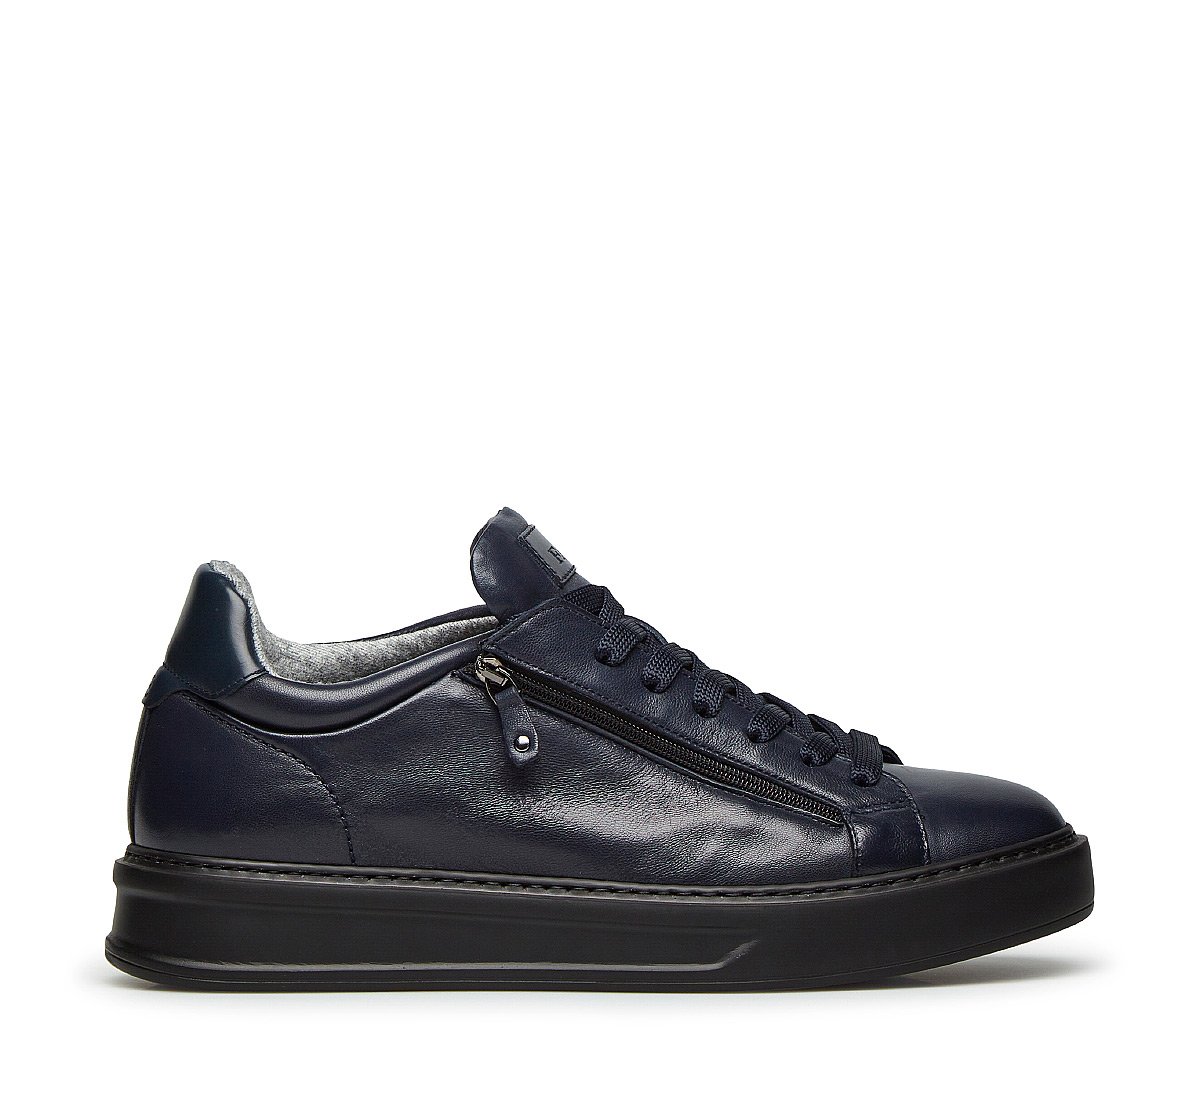 Sneakers in soft nappa leather